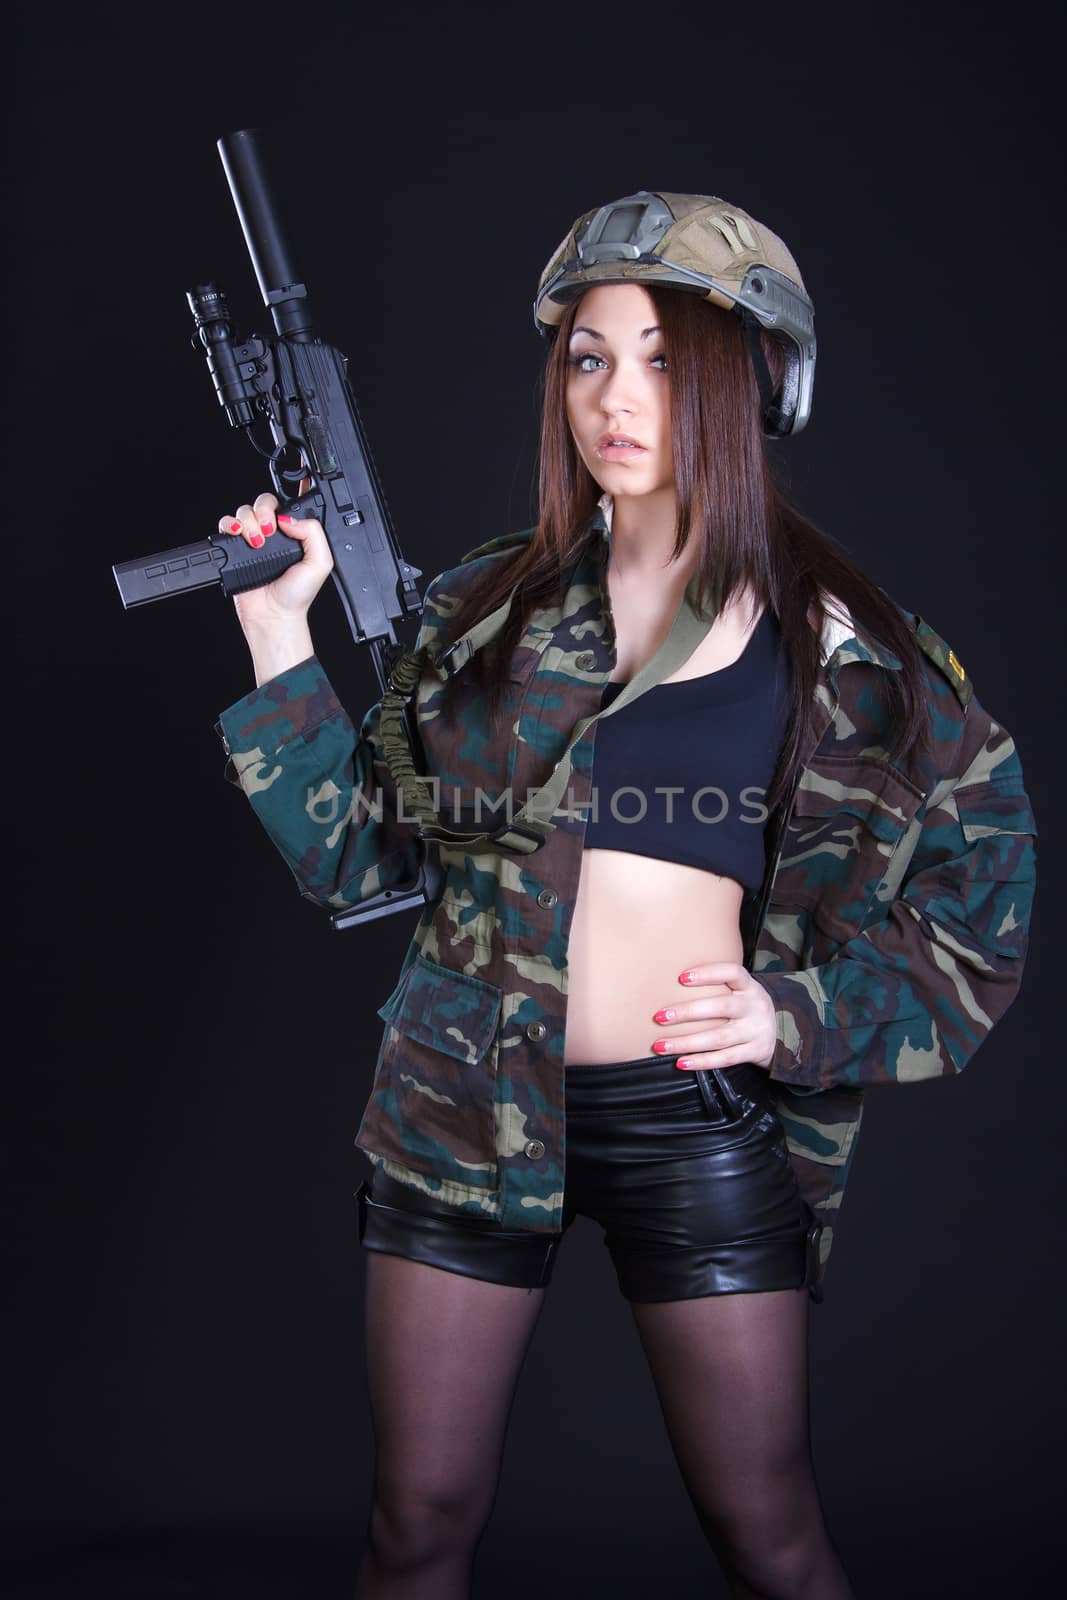 Portrait of a woman in a military uniform with a submachine gun over black background